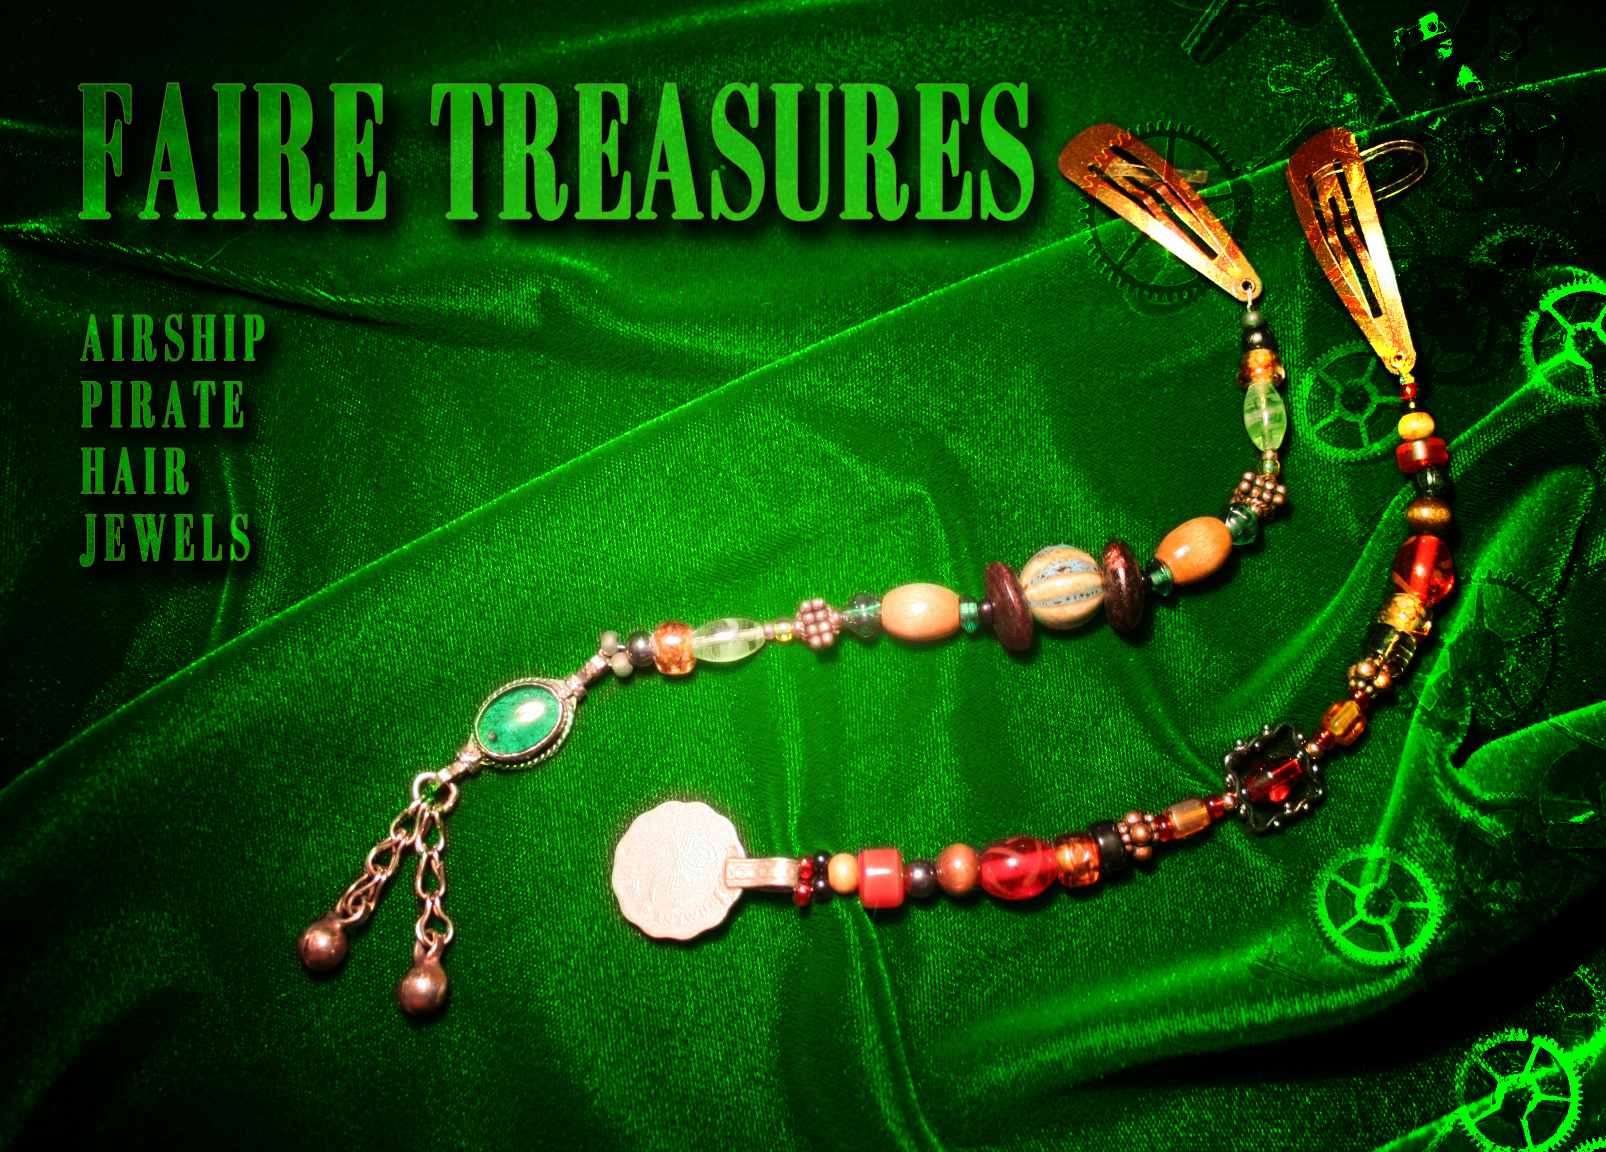 Faire Treasures Pirate Hair Jewels Donation